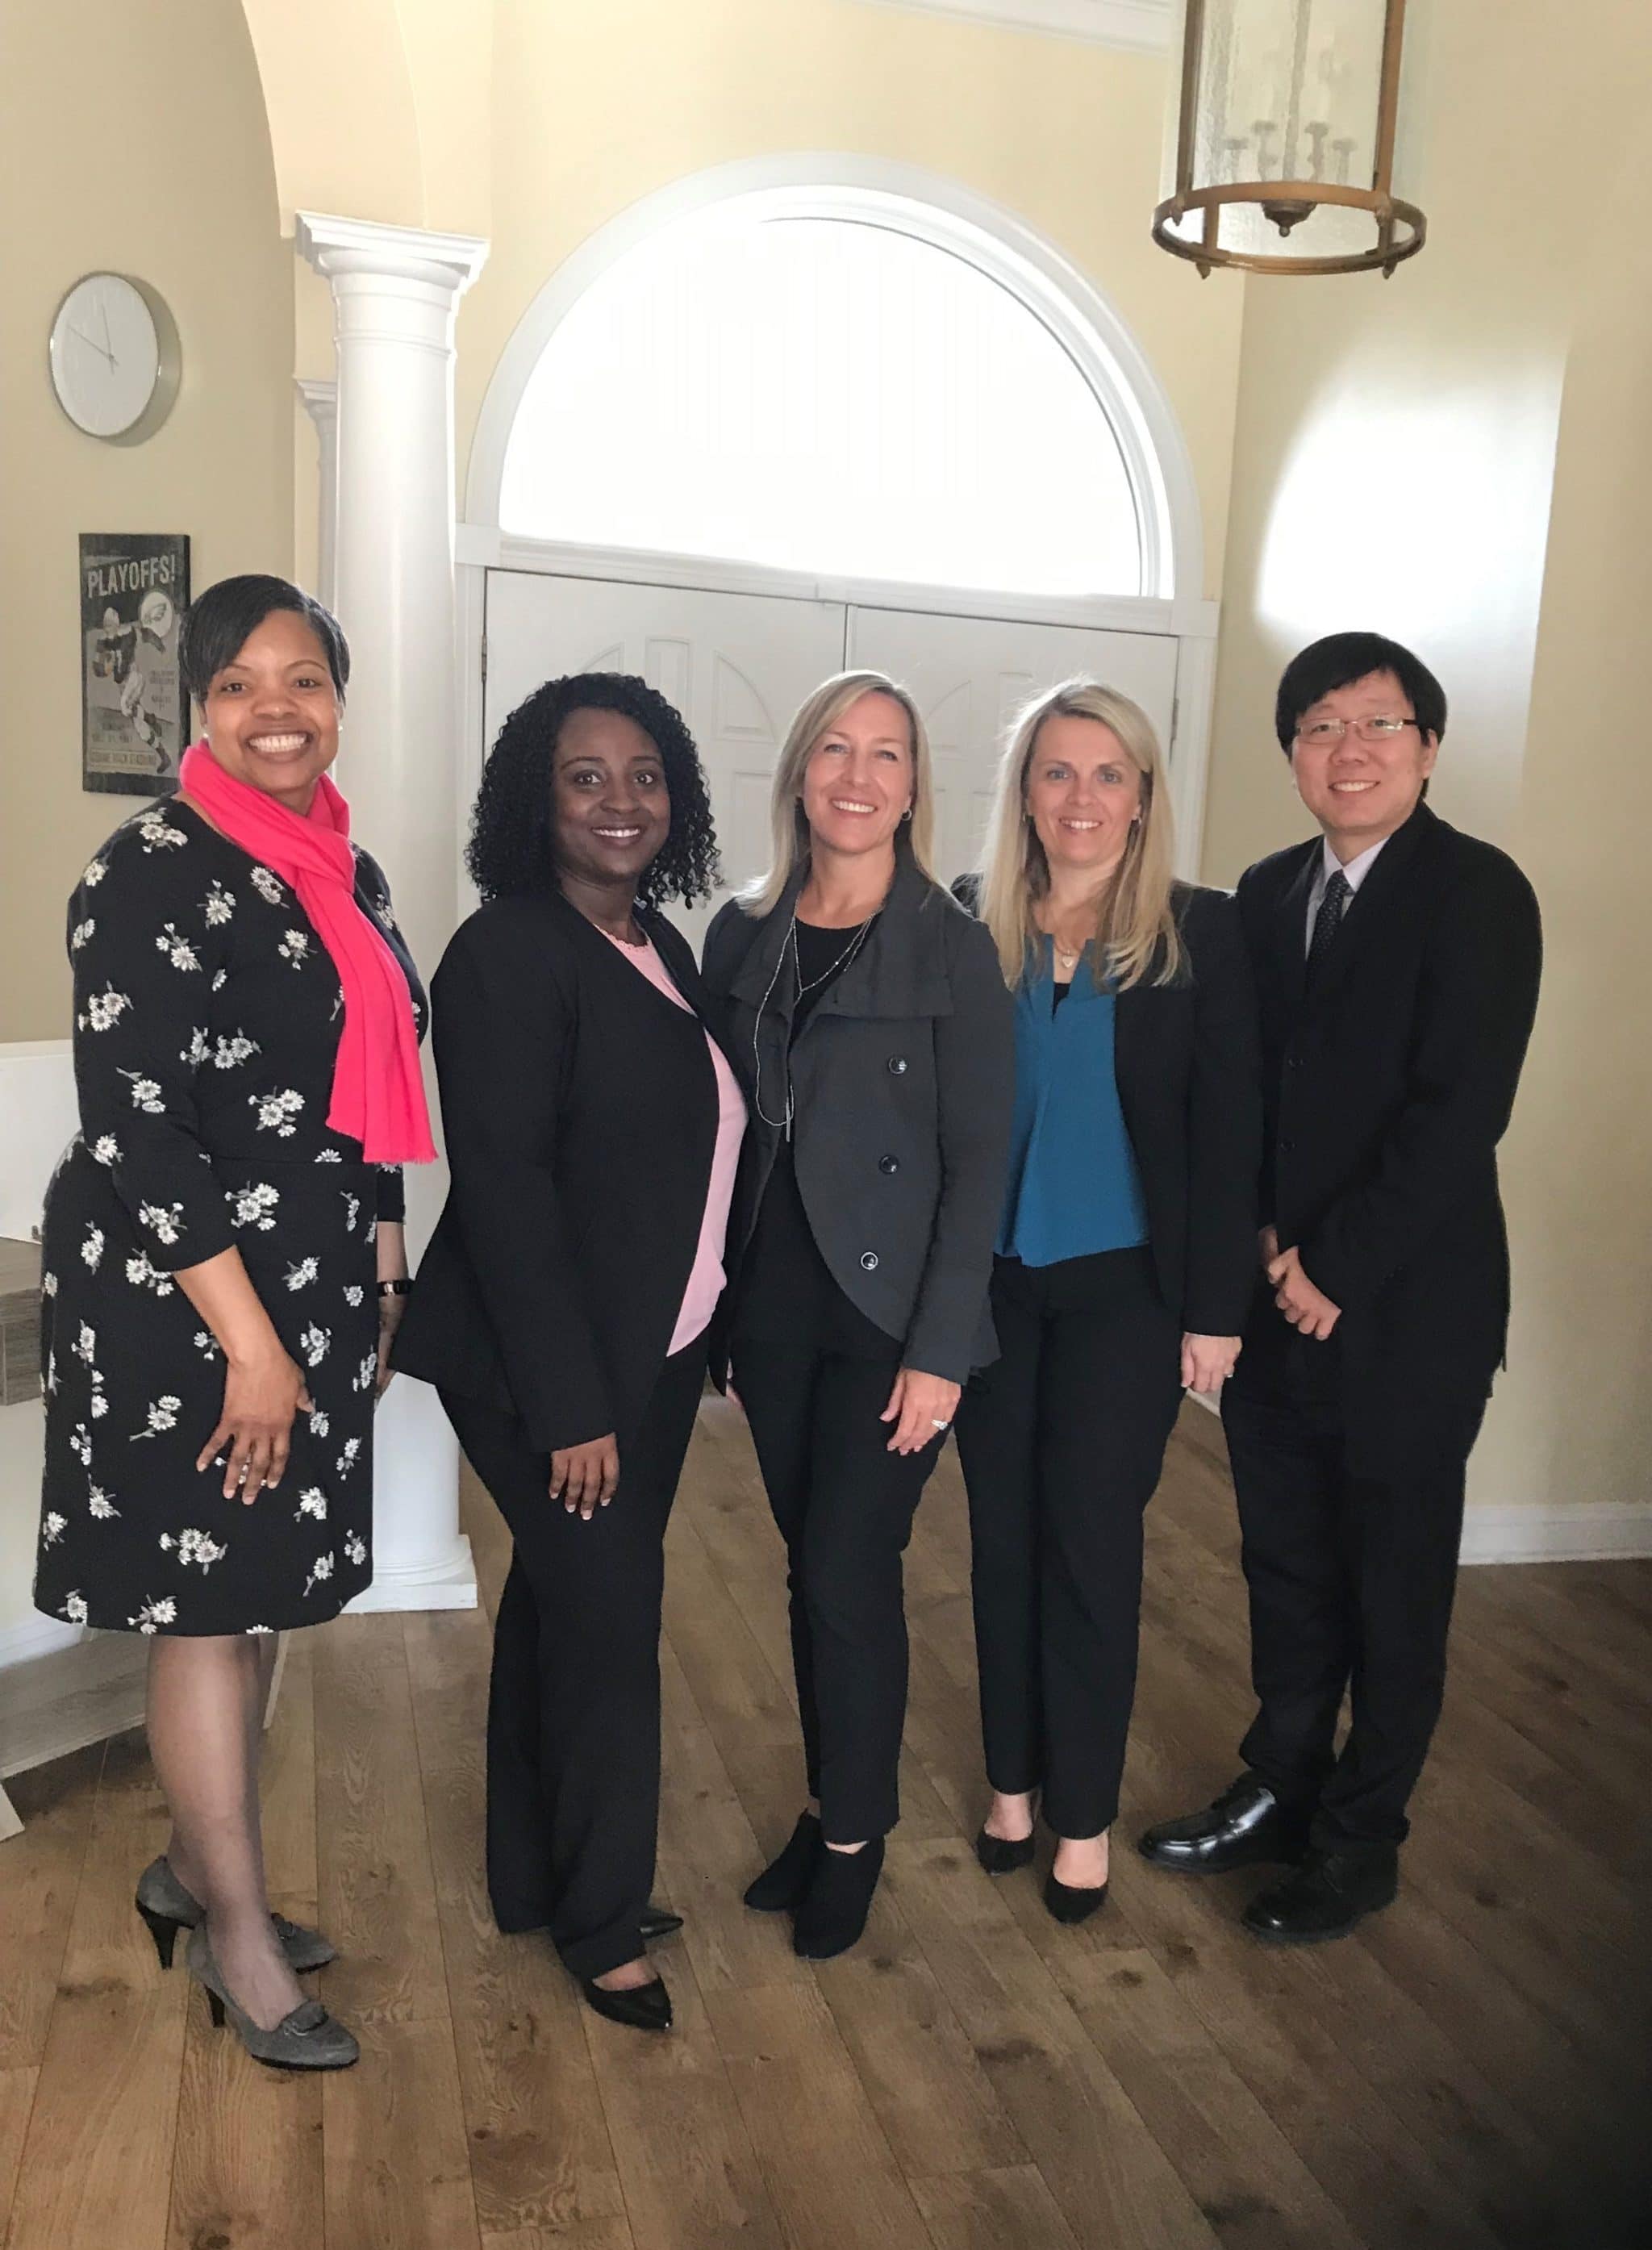 DCF Commissioner Christine Norbut Beyer (center) with Nancy Ward, Ida Bormentar, Svetlana Repic-Qira, and Andrew Park of Community Options to discuss residential services for children with disabilities.